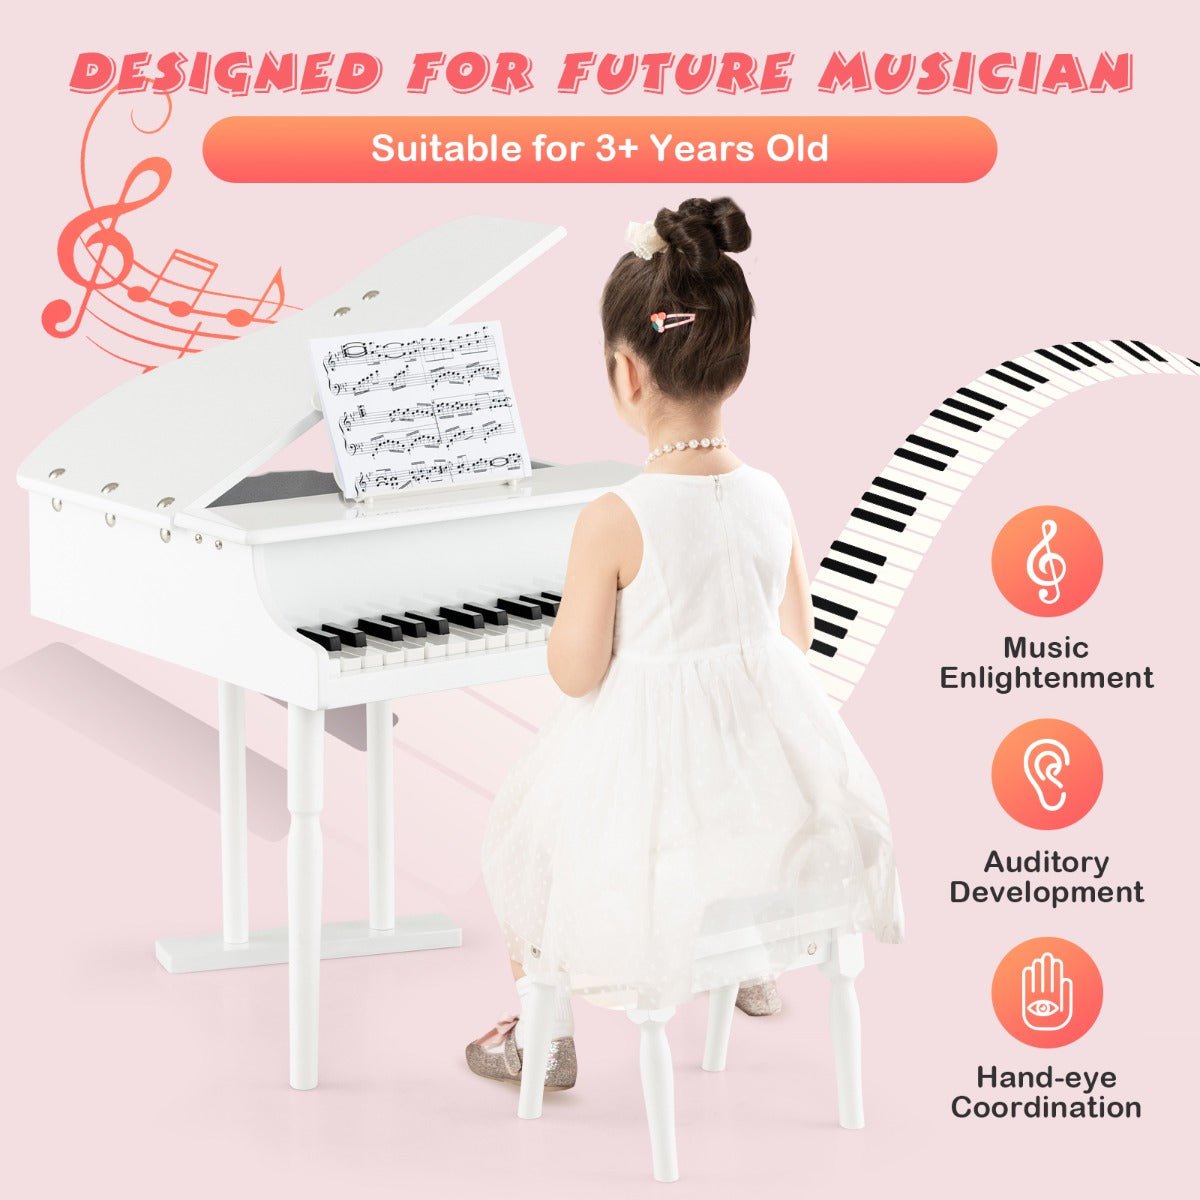 Buy the Piano Keyboard Toy for Young Musicians